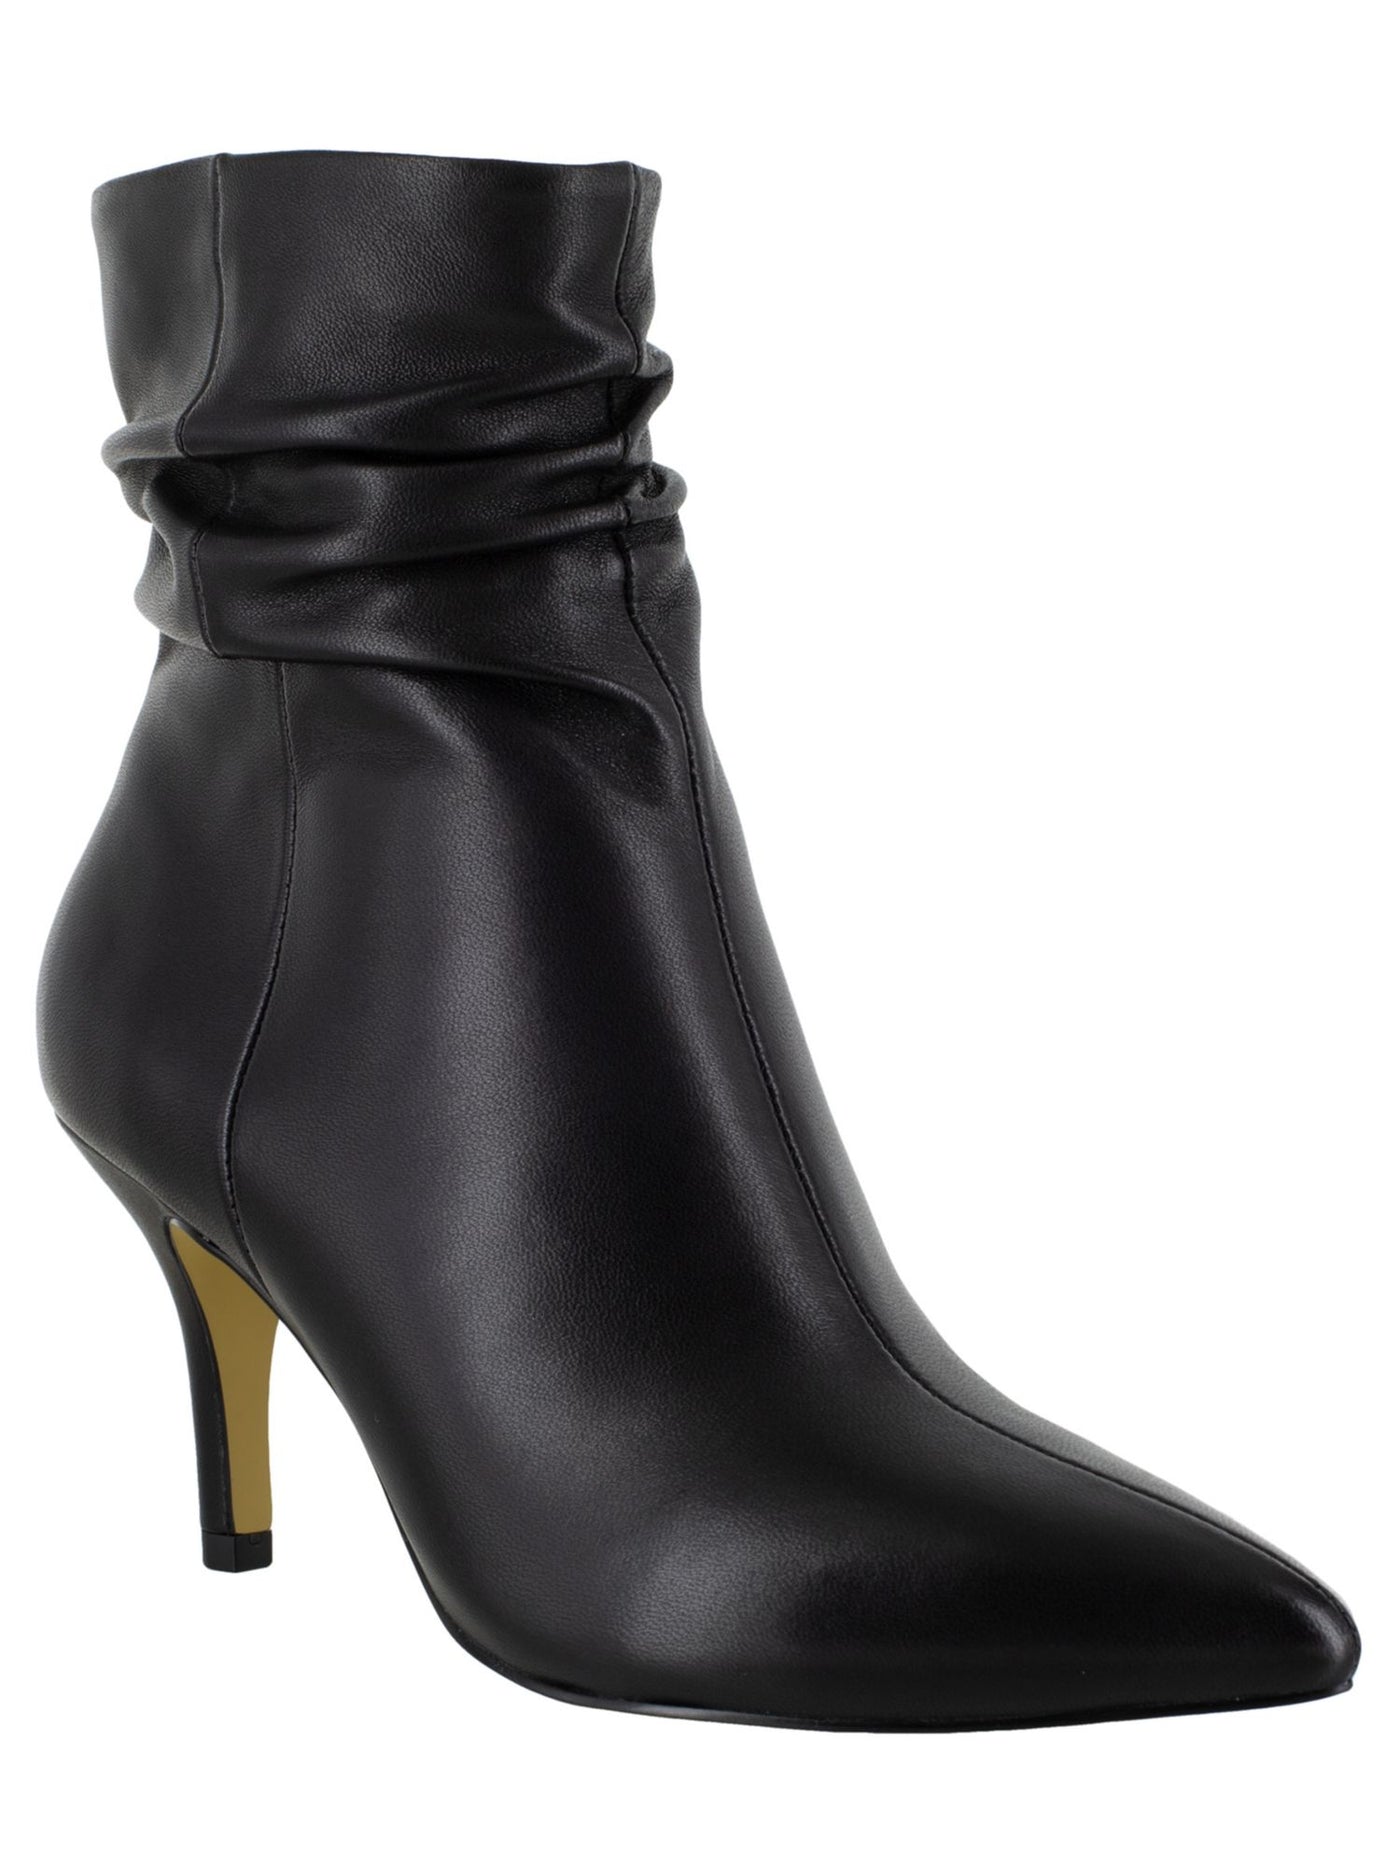 BELLA VITA Womens Black Ruched Padded Danielle Pointed Toe Stiletto Zip-Up Leather Booties 9 M